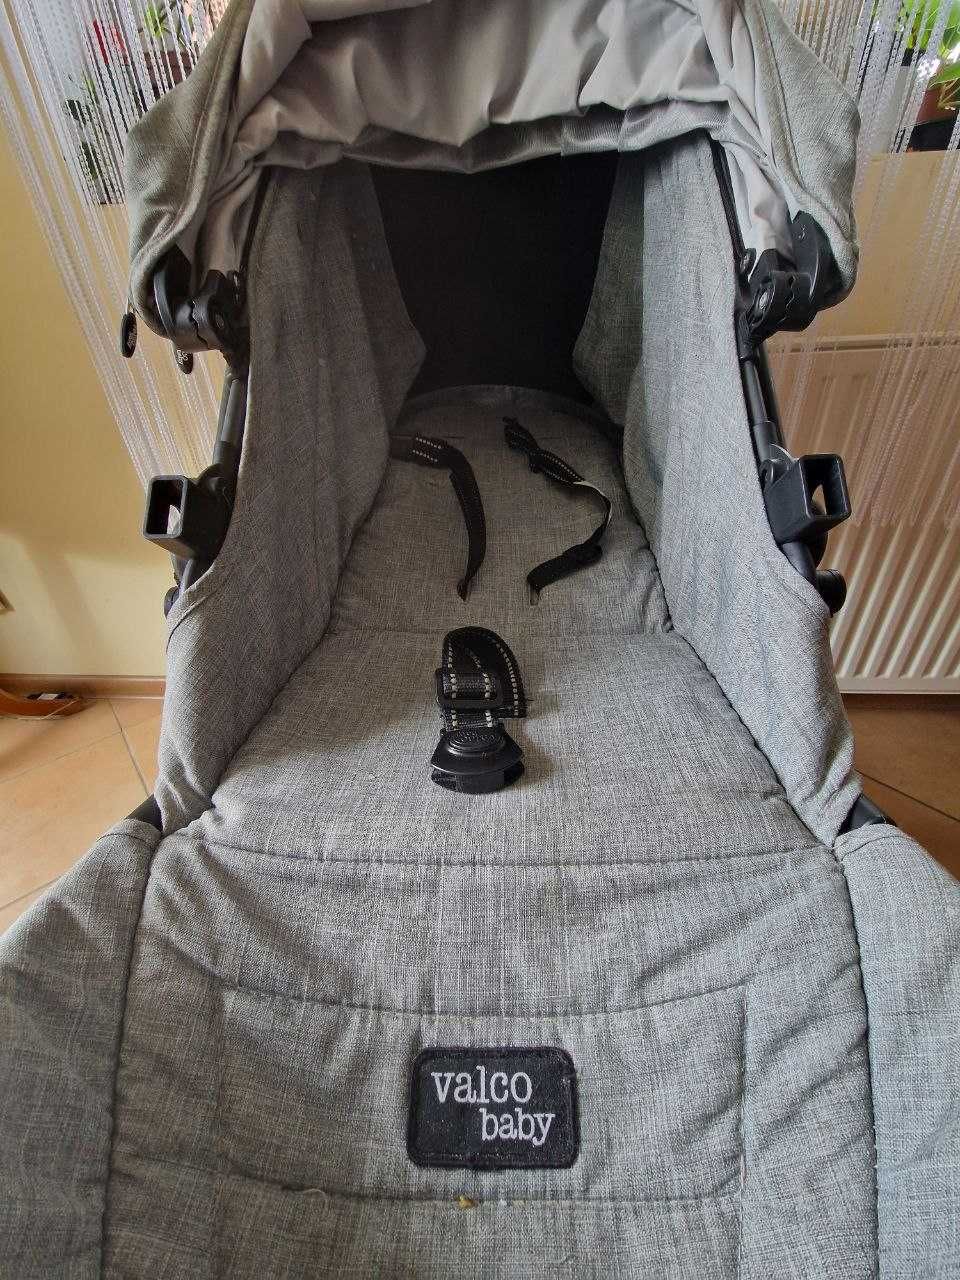 ValcoBaby snap ultra